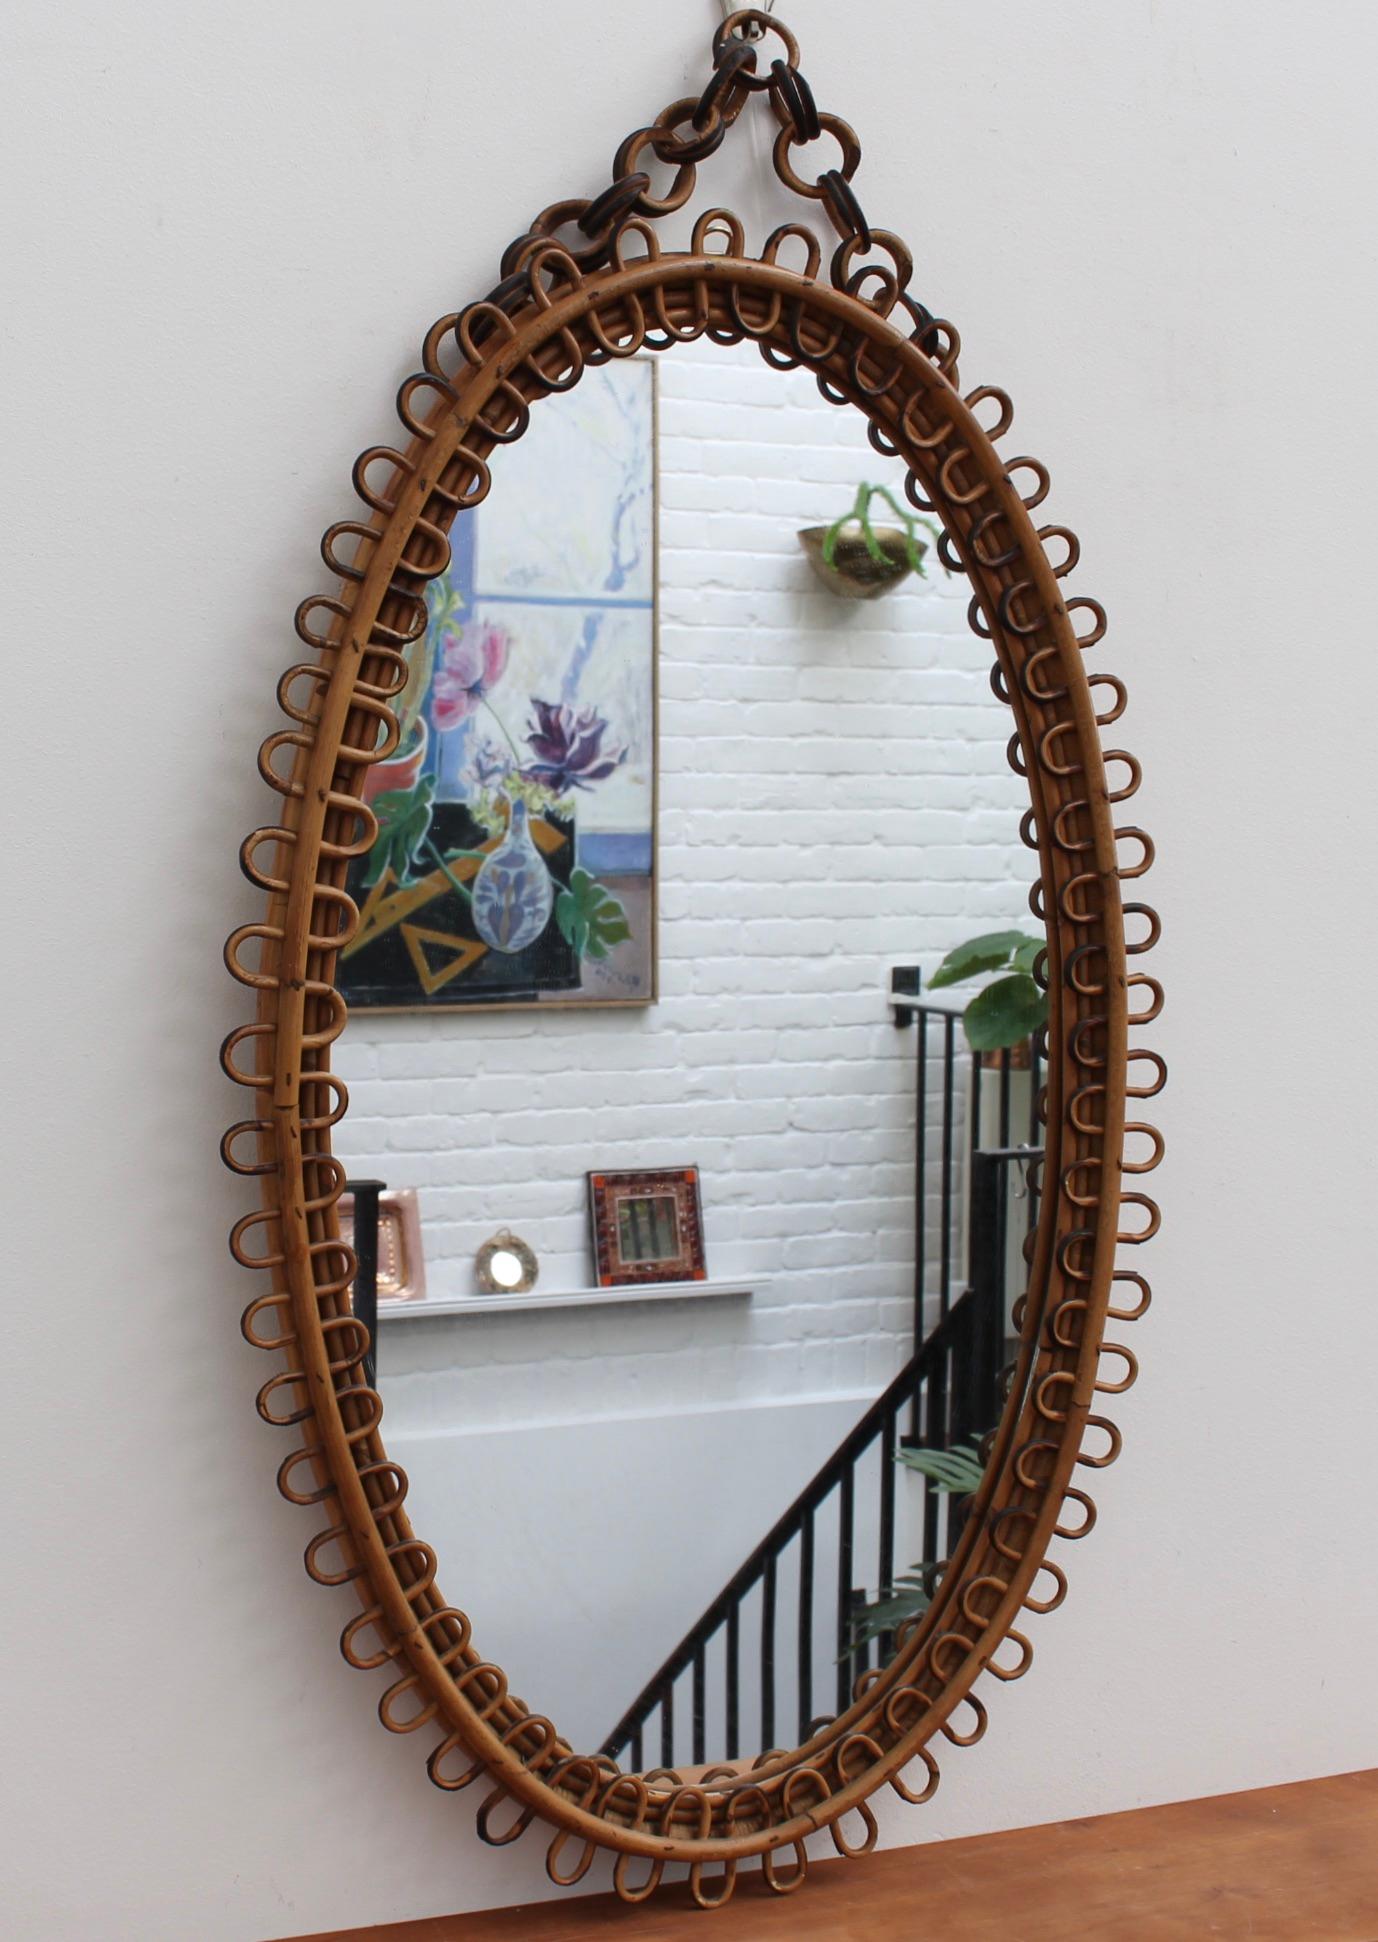 Italian oval-shaped rattan wall mirror with hanging chain (circa 1960s). This mirror has a very charming oval shape with rattan wave-forms framing the glass. The original rattan hanging chain adds further allure. There is a characterful, aged patina